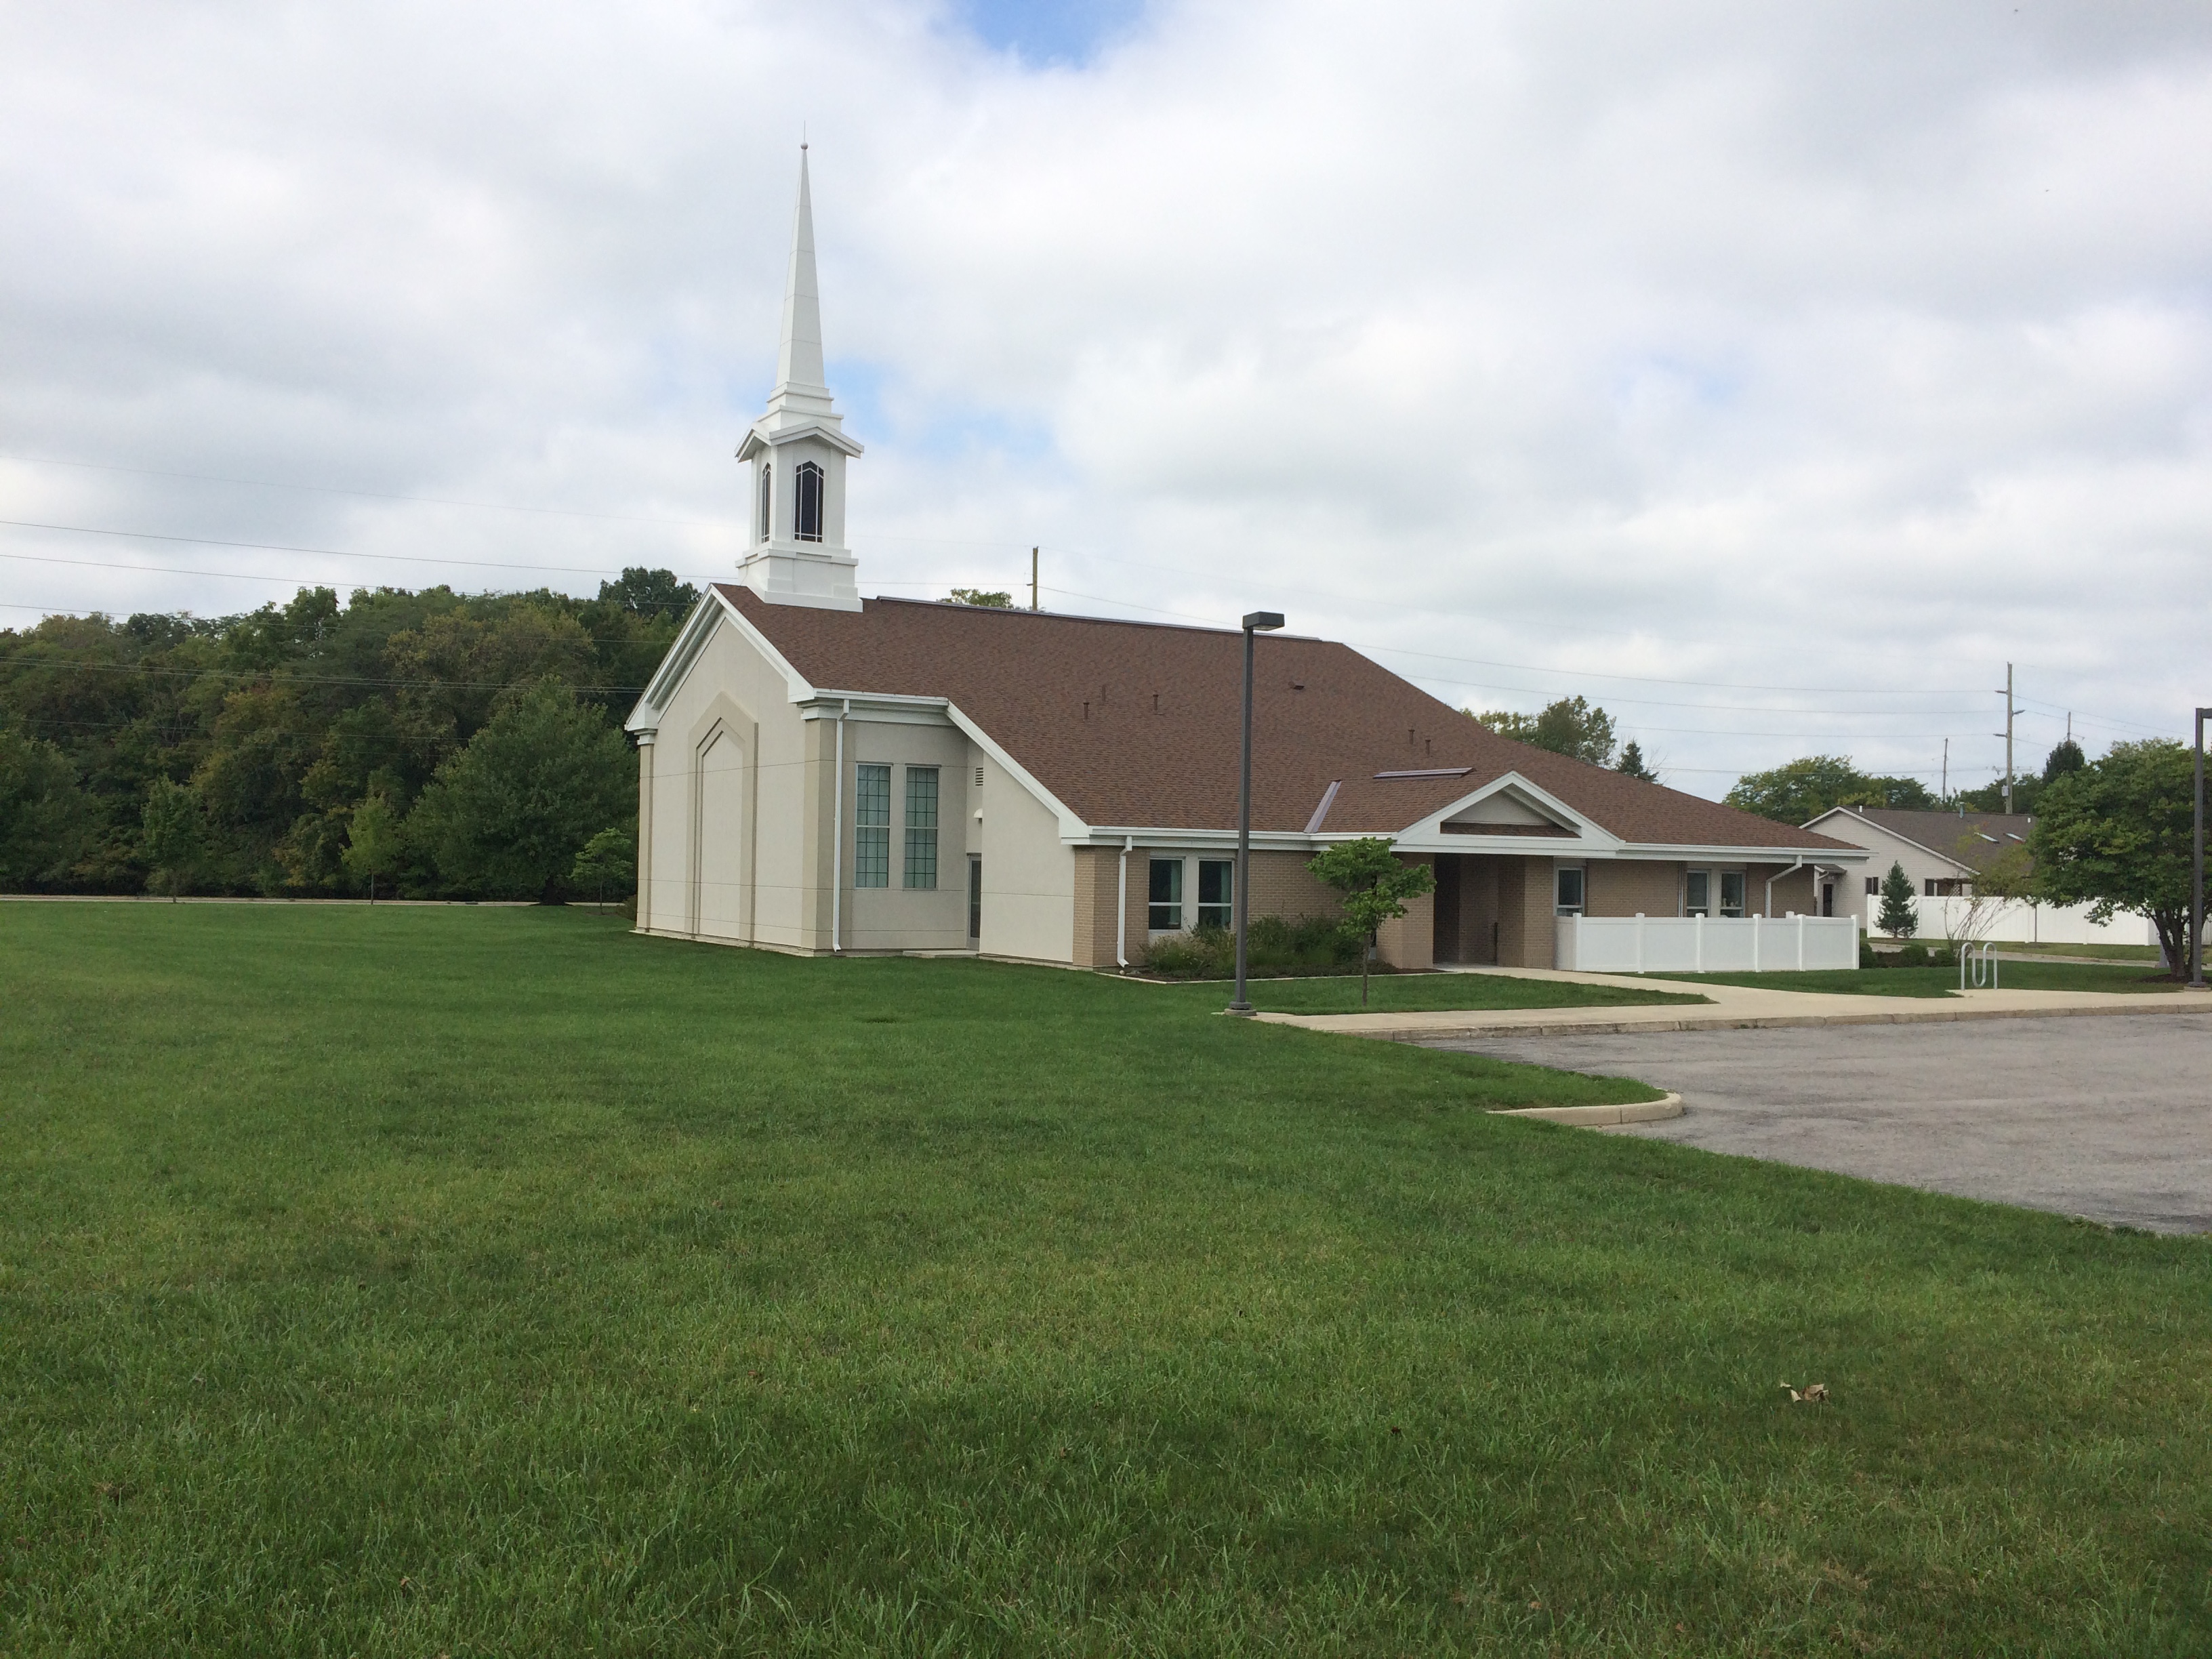 Bryan meetinghouse of the Church of Jesus Christ of Latter-day Saints located at 515 Town Line Road, Bryan, OH 43506.